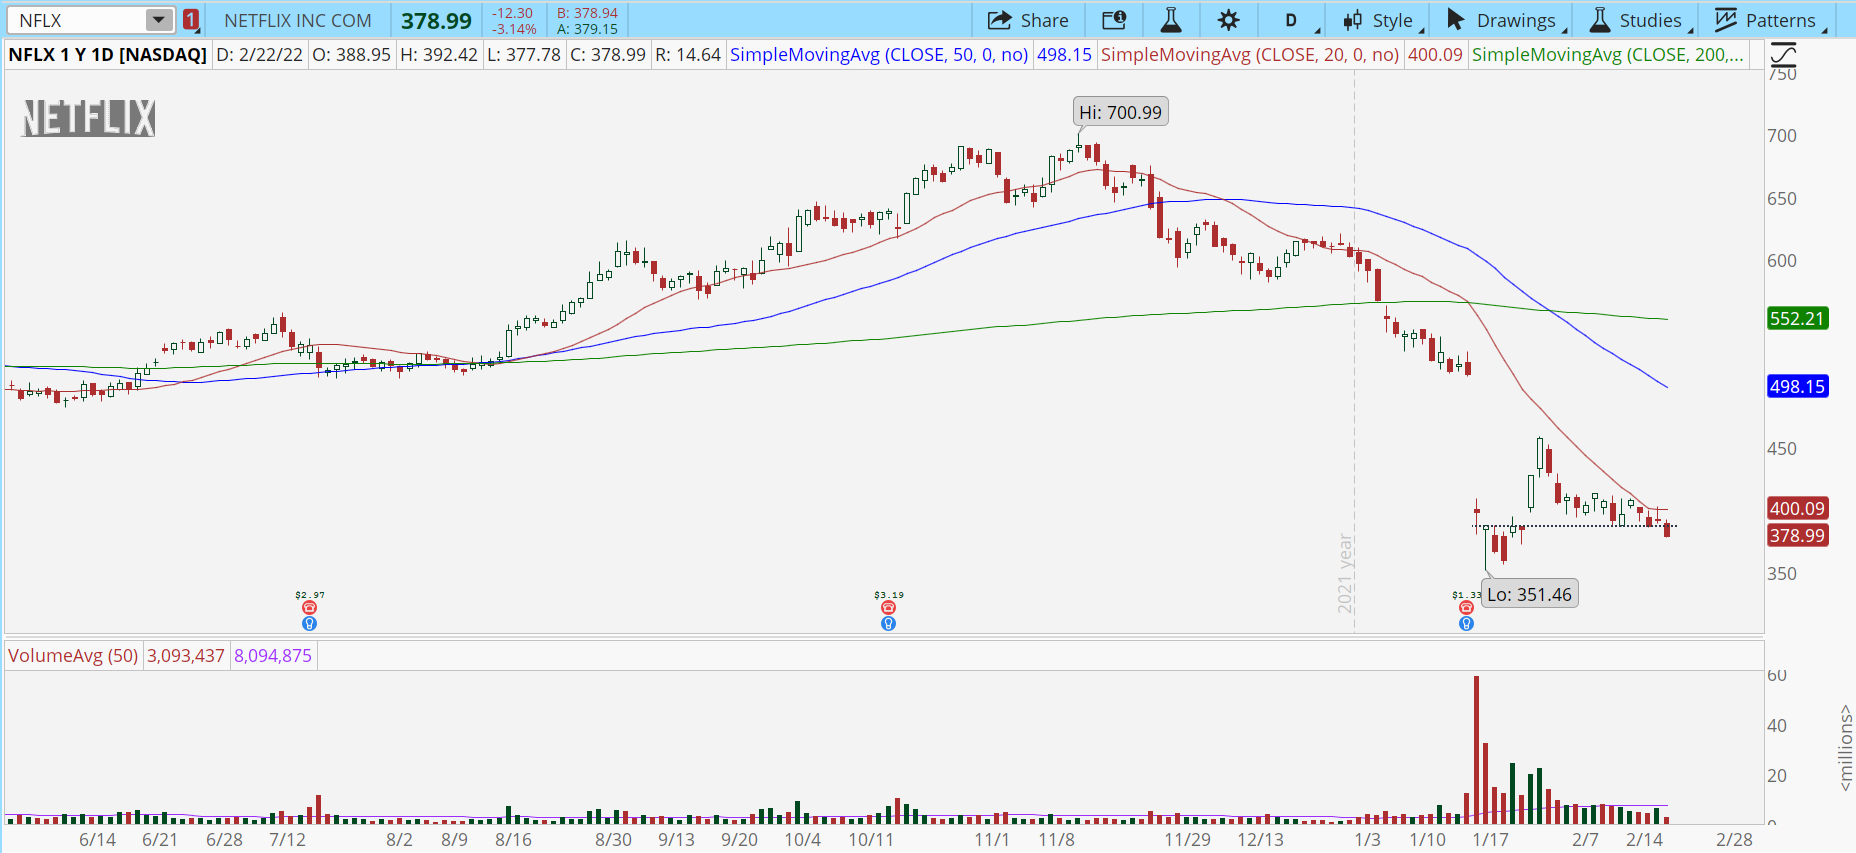 Netflix (NFLX) stock chart with support break.